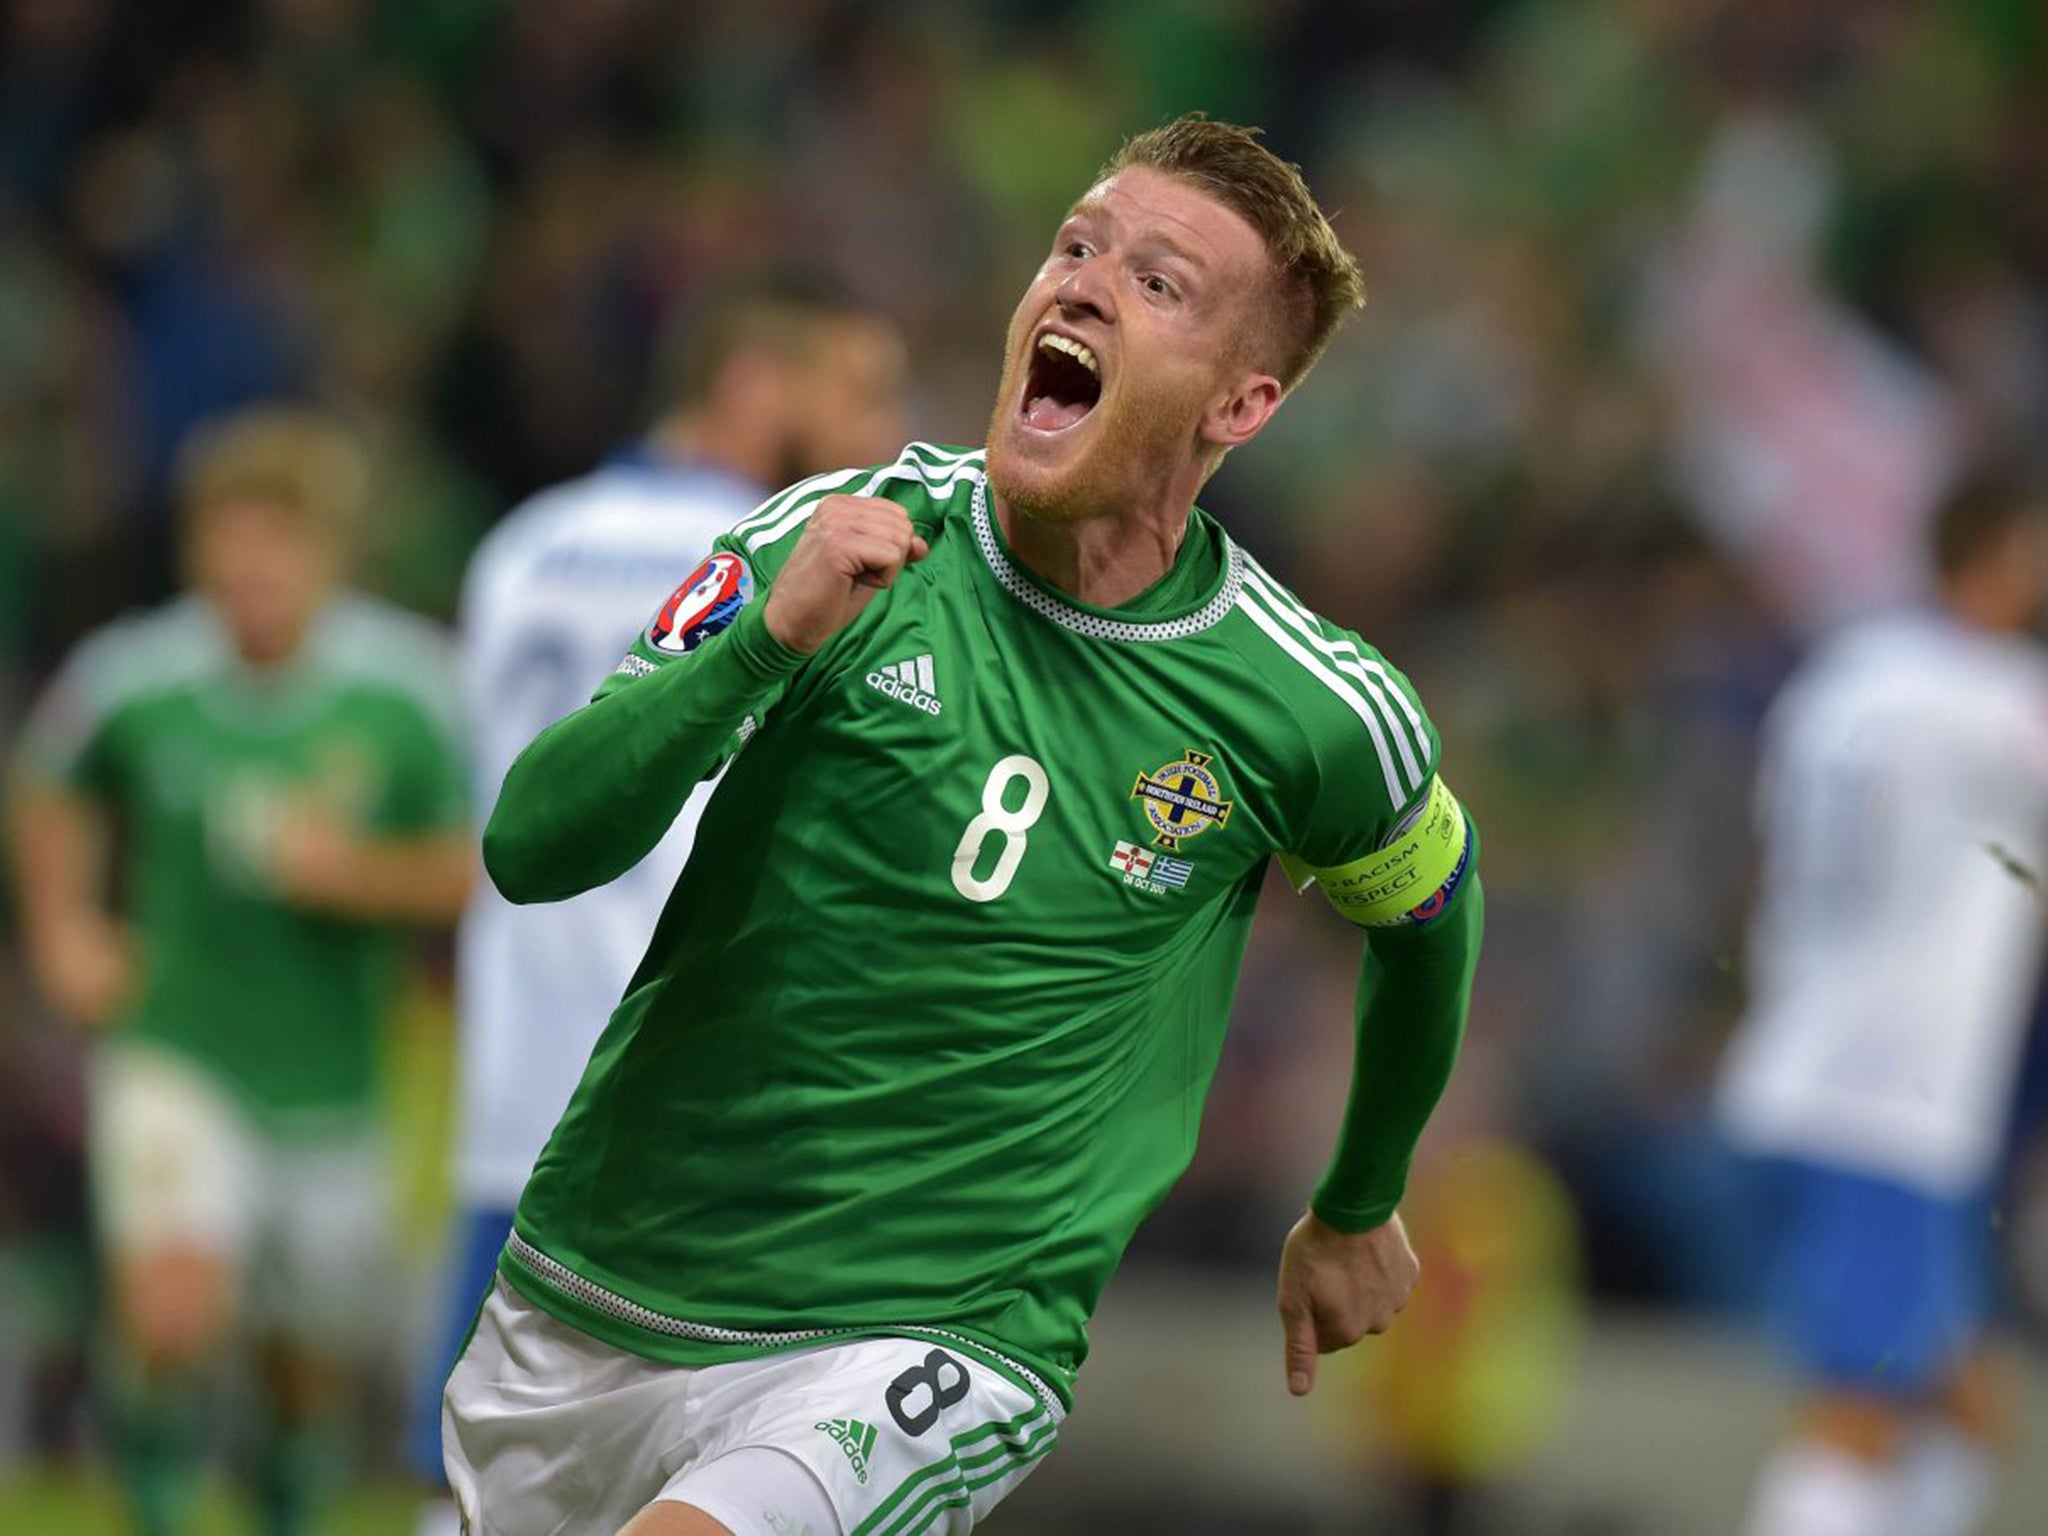 Steven Davis of Northern Ireland celebrates after scoring his side’s third goal against Greece in a 3-1 win in Belfast that takes them to Euro 2016